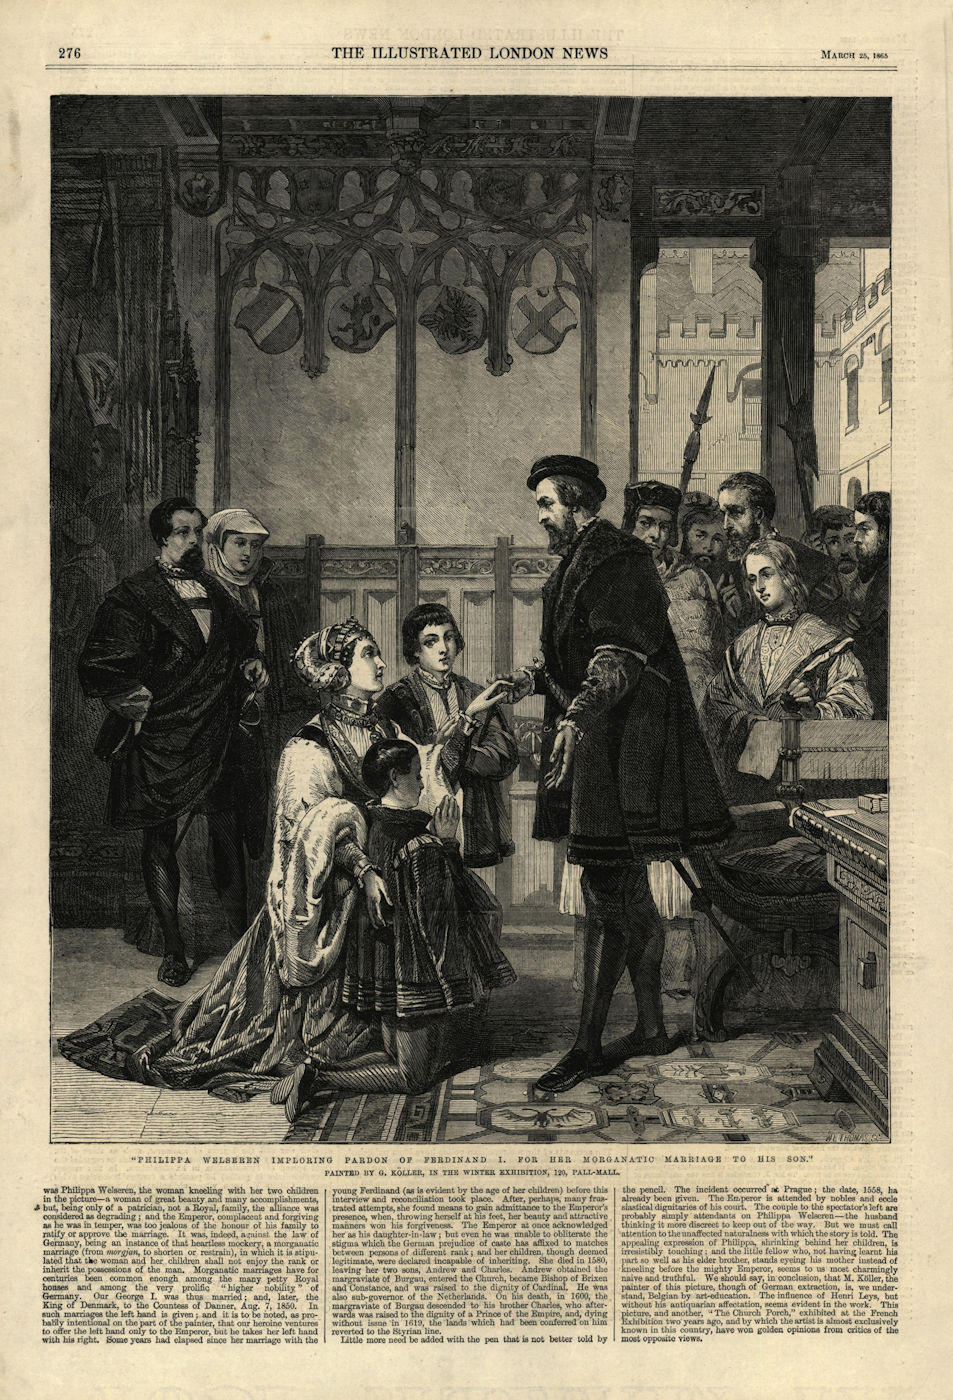 Philippa Welseren asking pardon for morganatic marriage to Ferdinand's son 1865